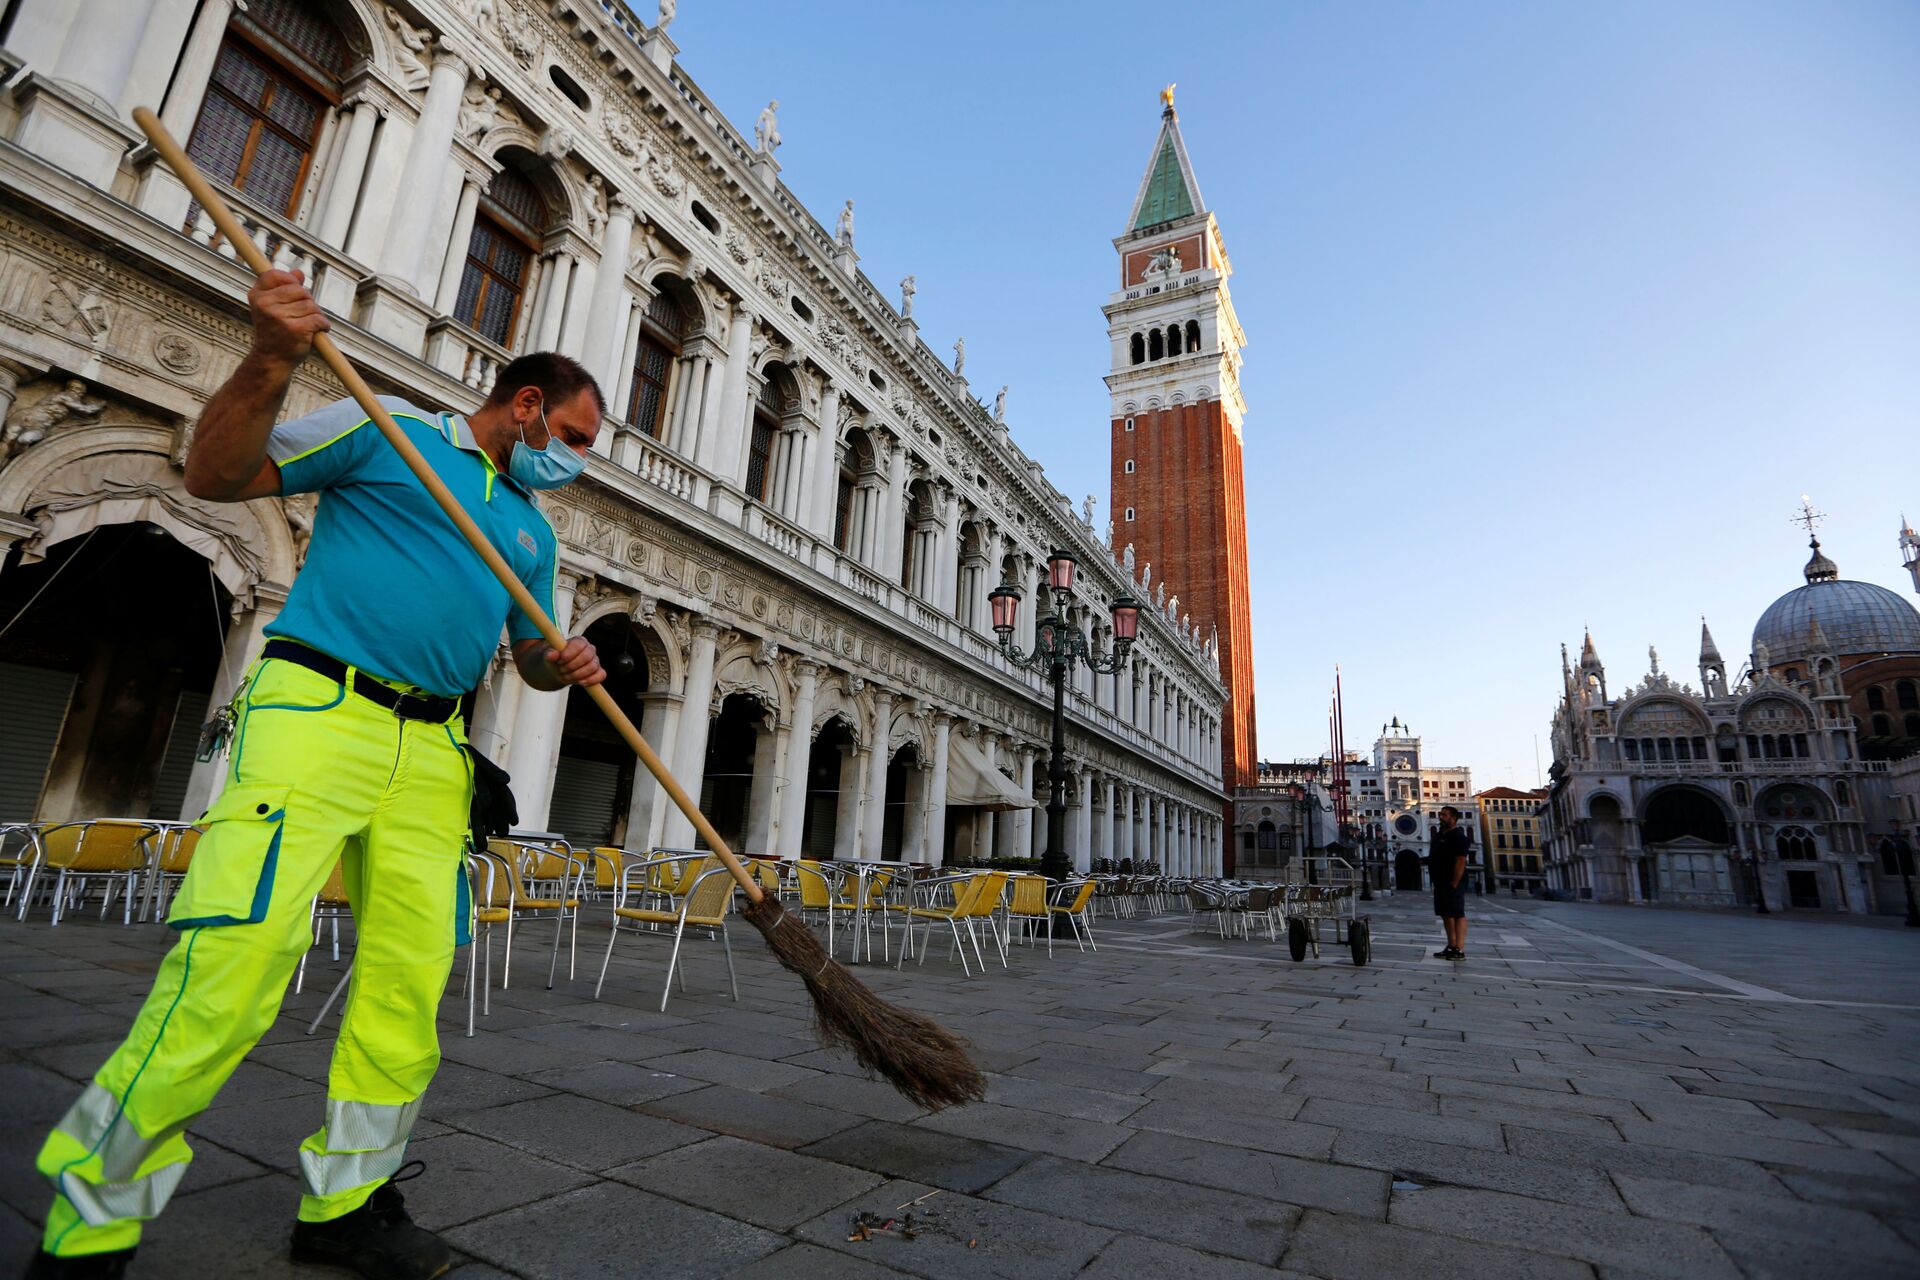 A city worker cleans the Piazzetta next to St. Mark's Square, amid the coronavirus disease (COVID-19) outbreak, in Venice, Italy June 19, 2020 - Sputnik International, 1920, 04.12.2021